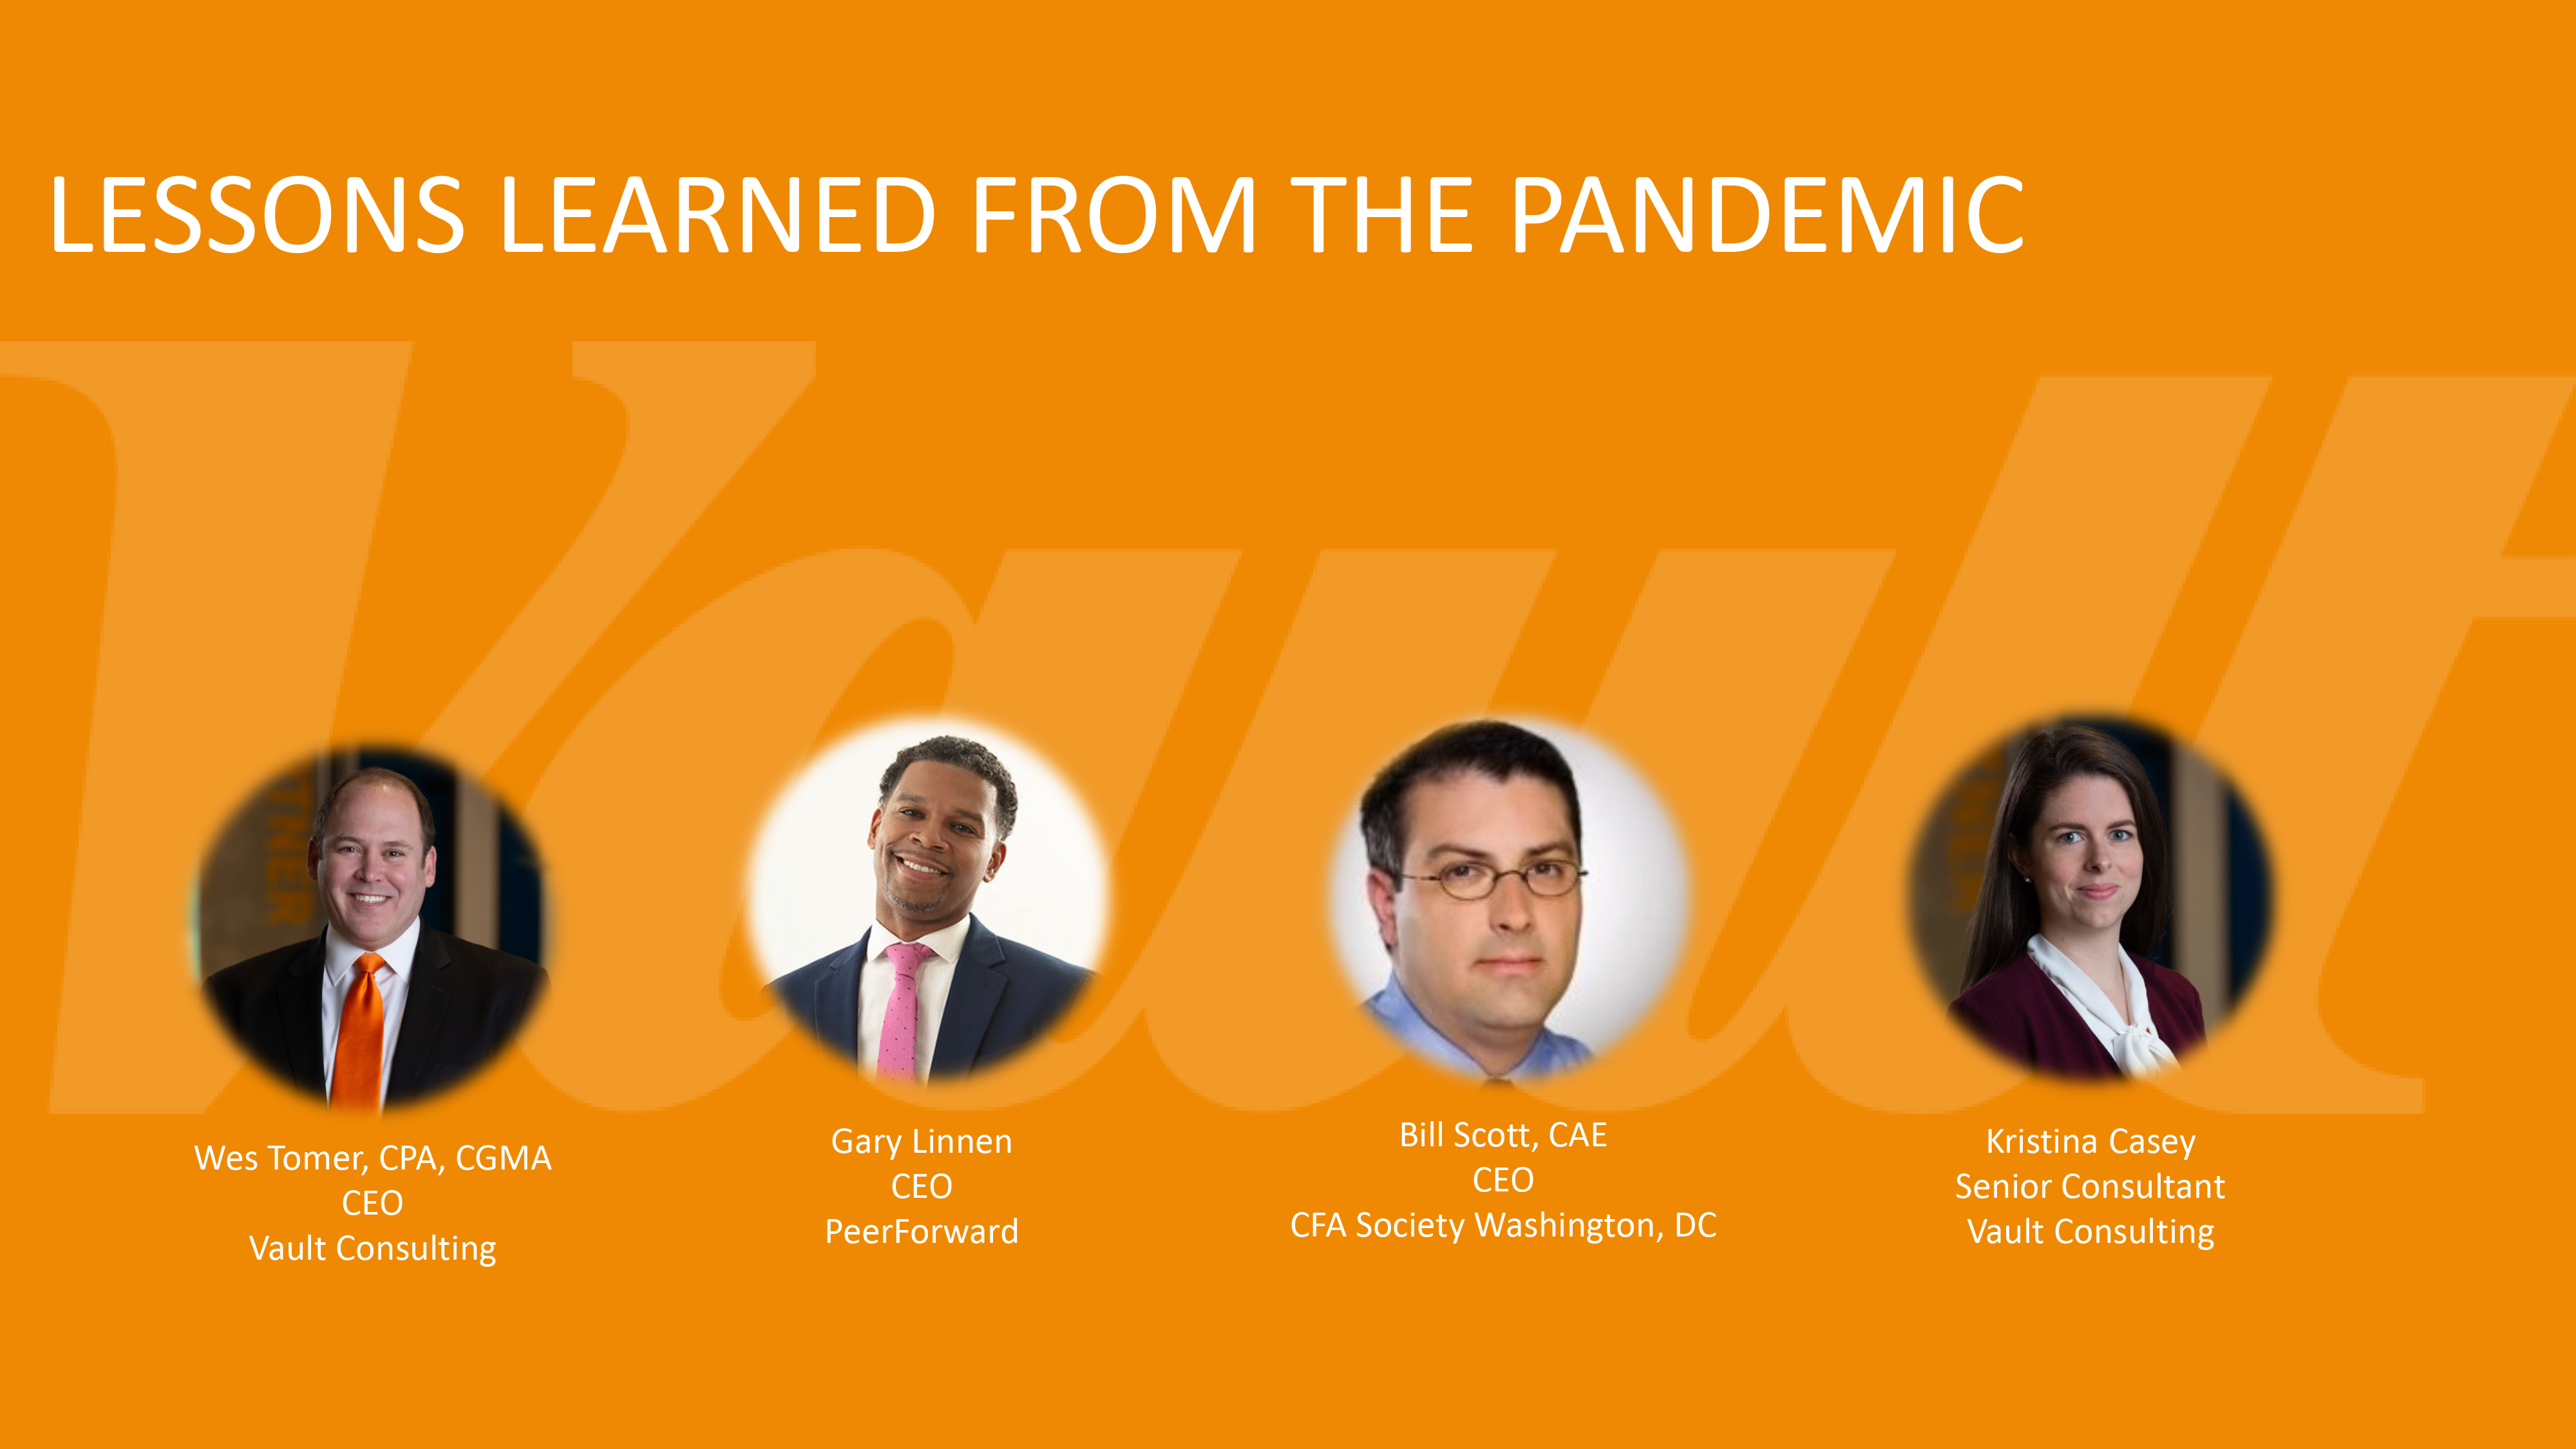 Planning For Accounting Department Disruption – Lessons Learned From the Pandemic